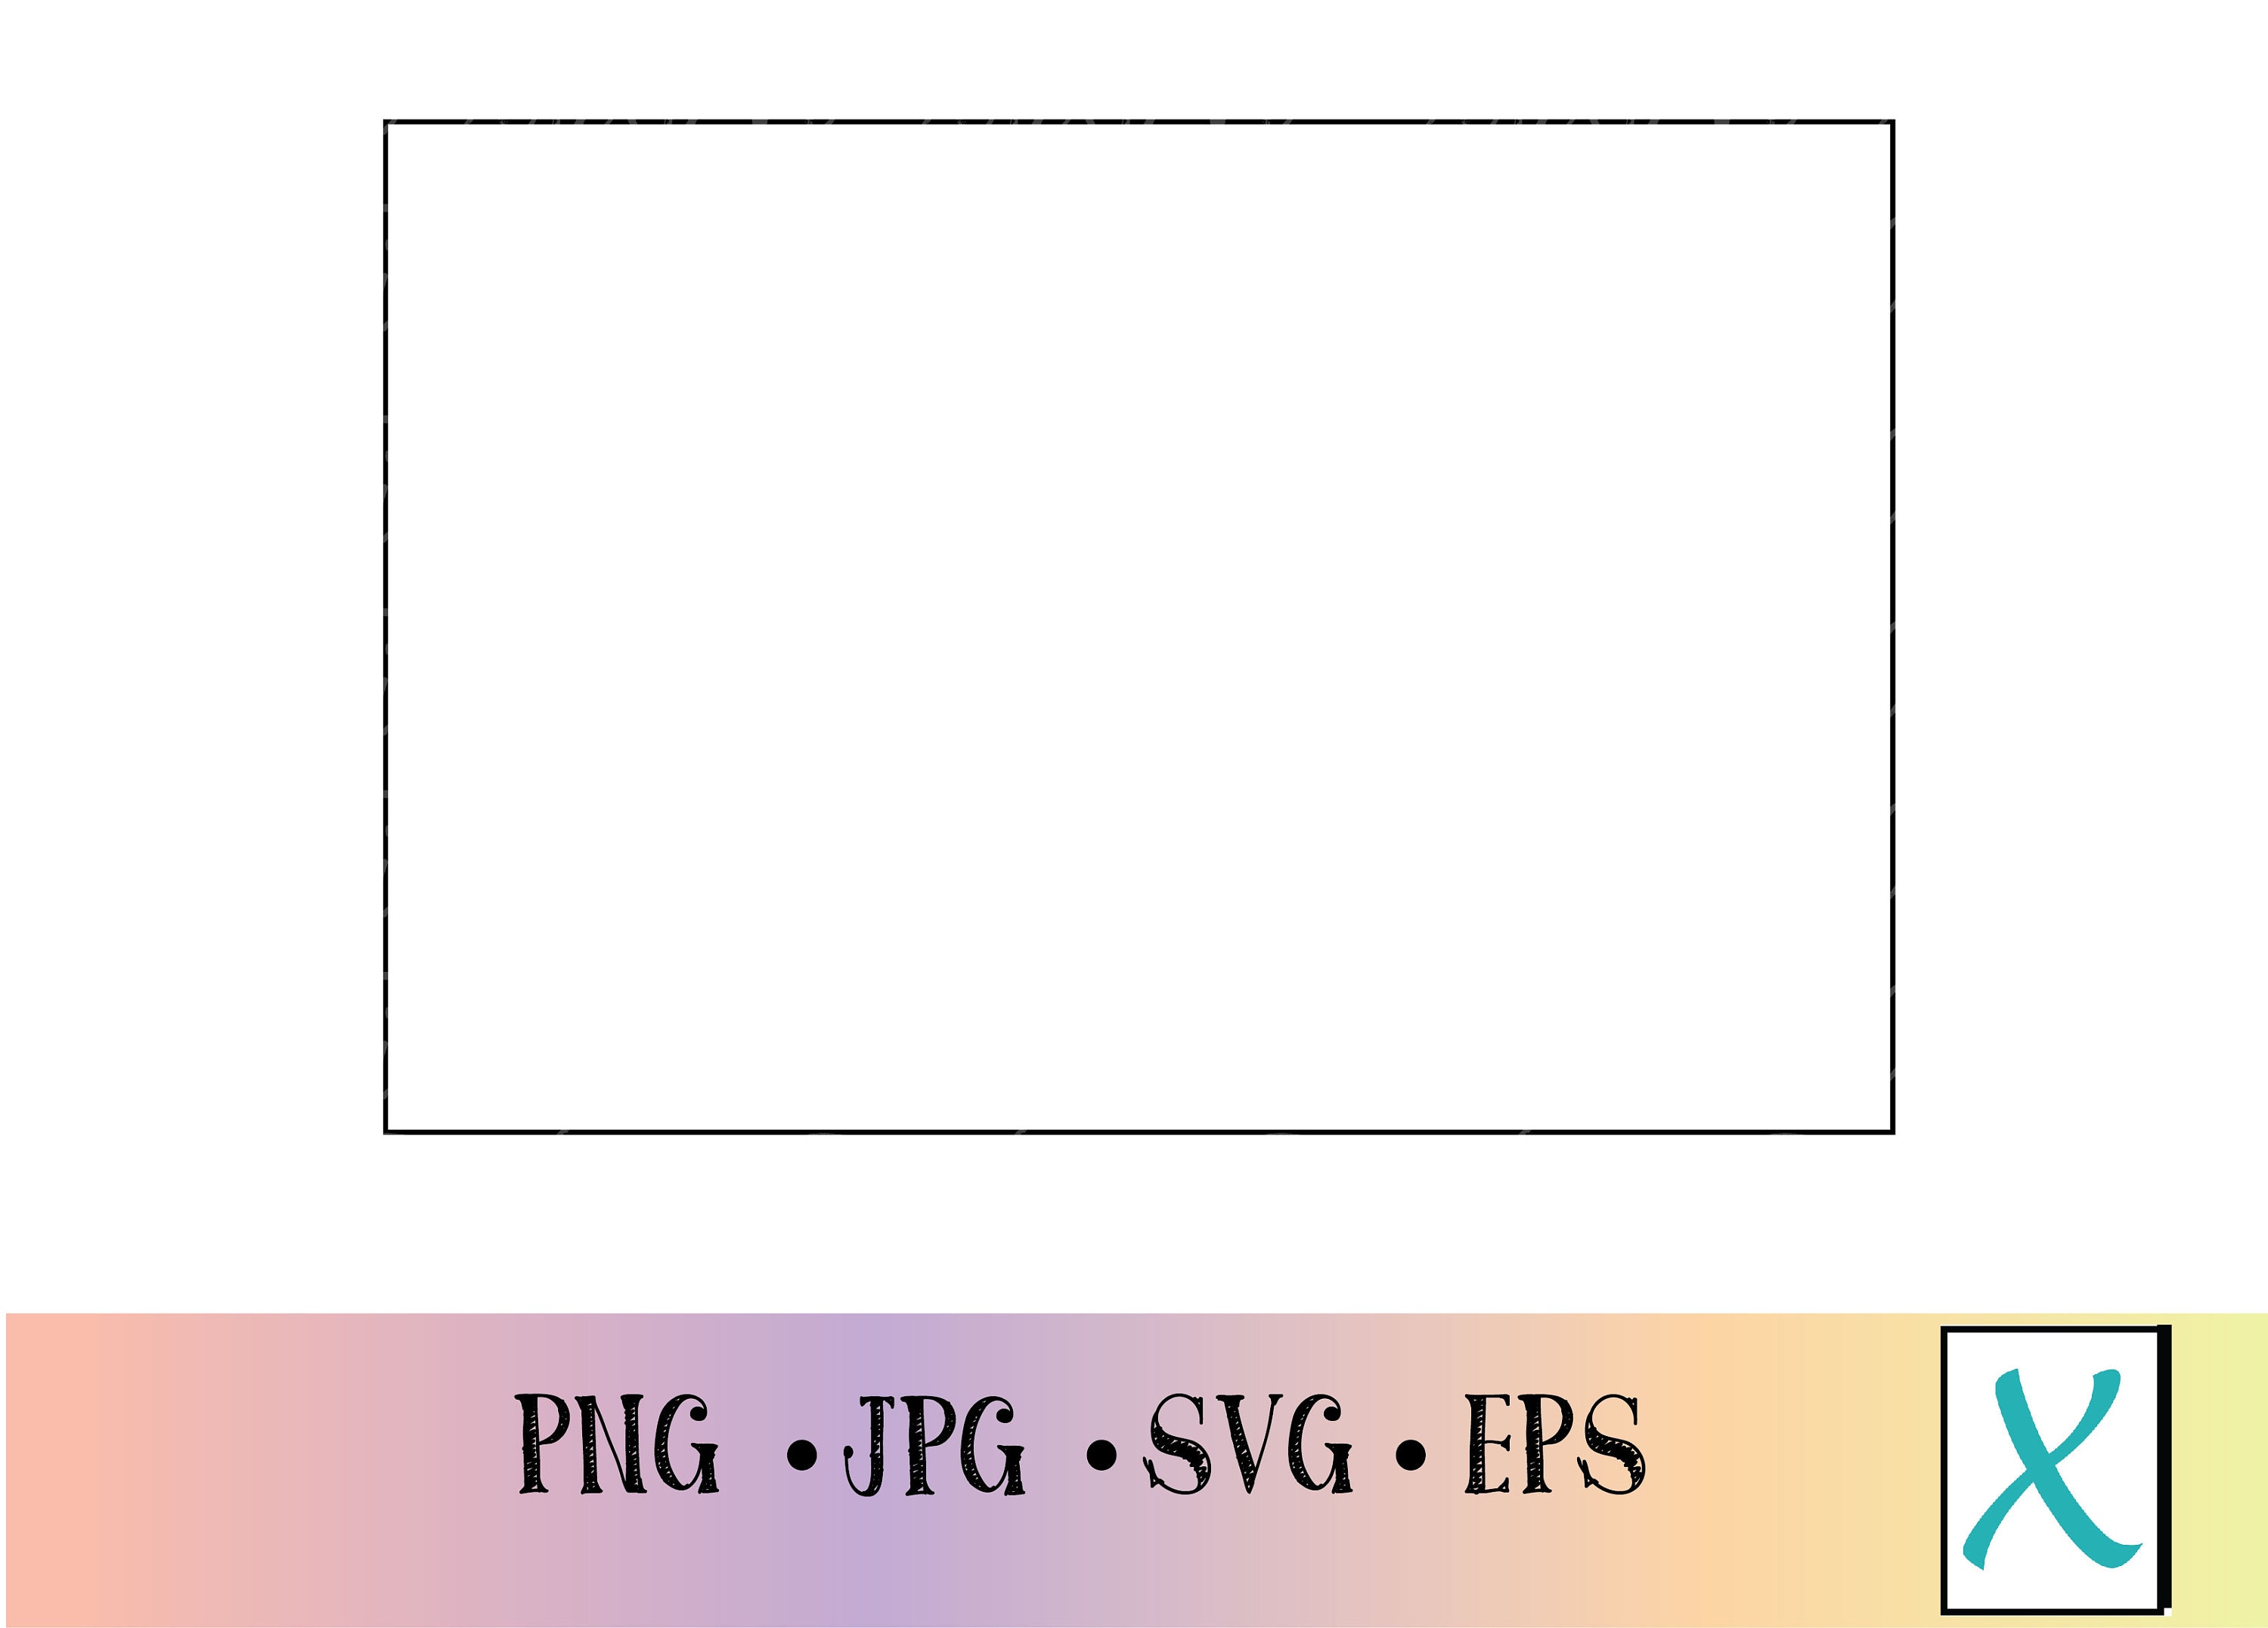 gold rectangle png